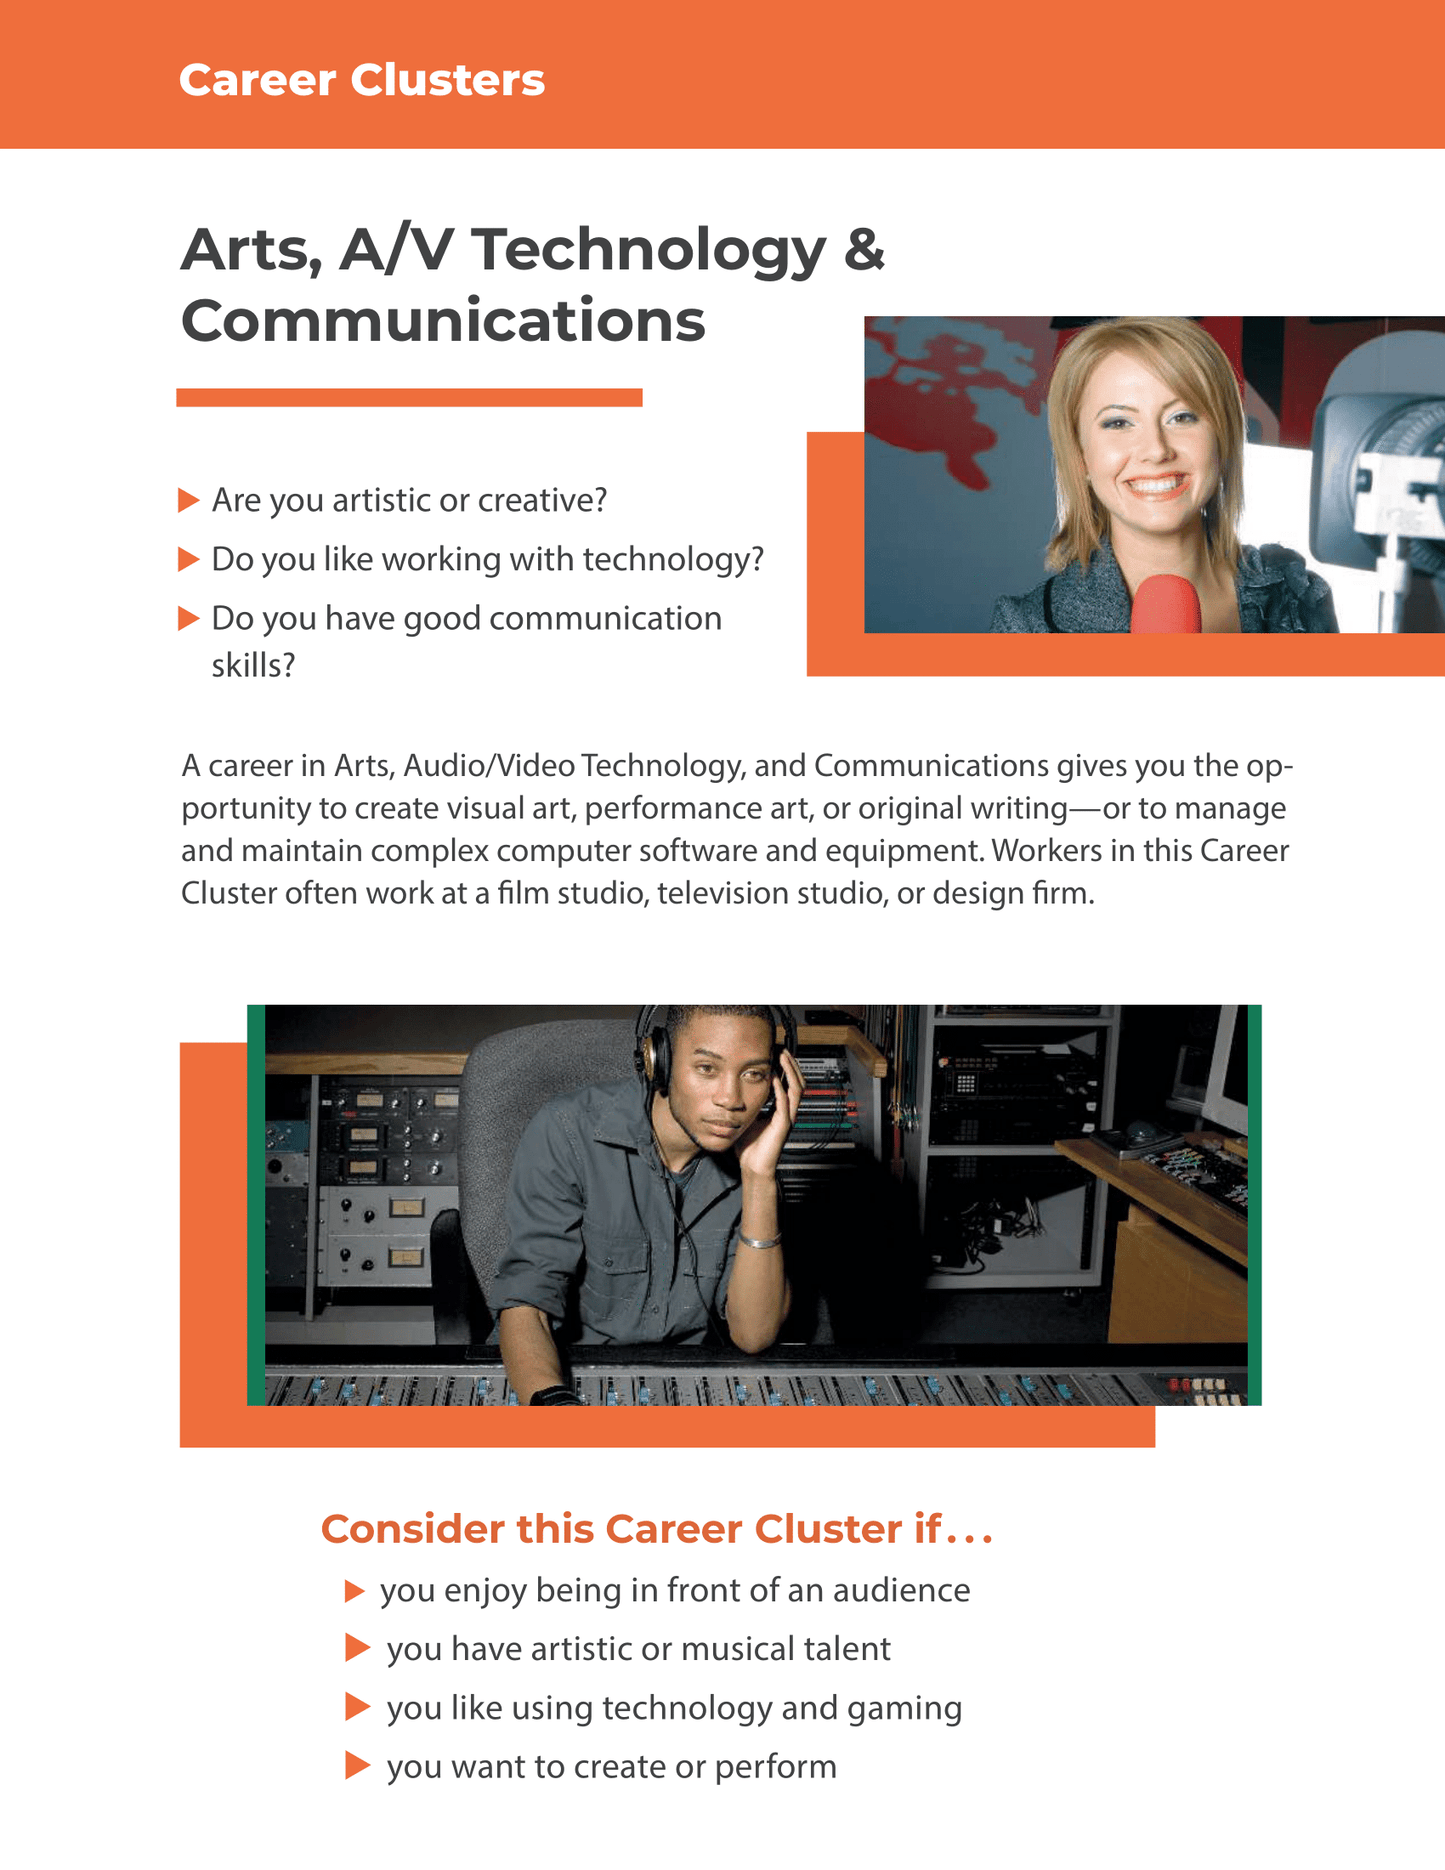 Career Clusters - Arts, AV Technology, and Communications